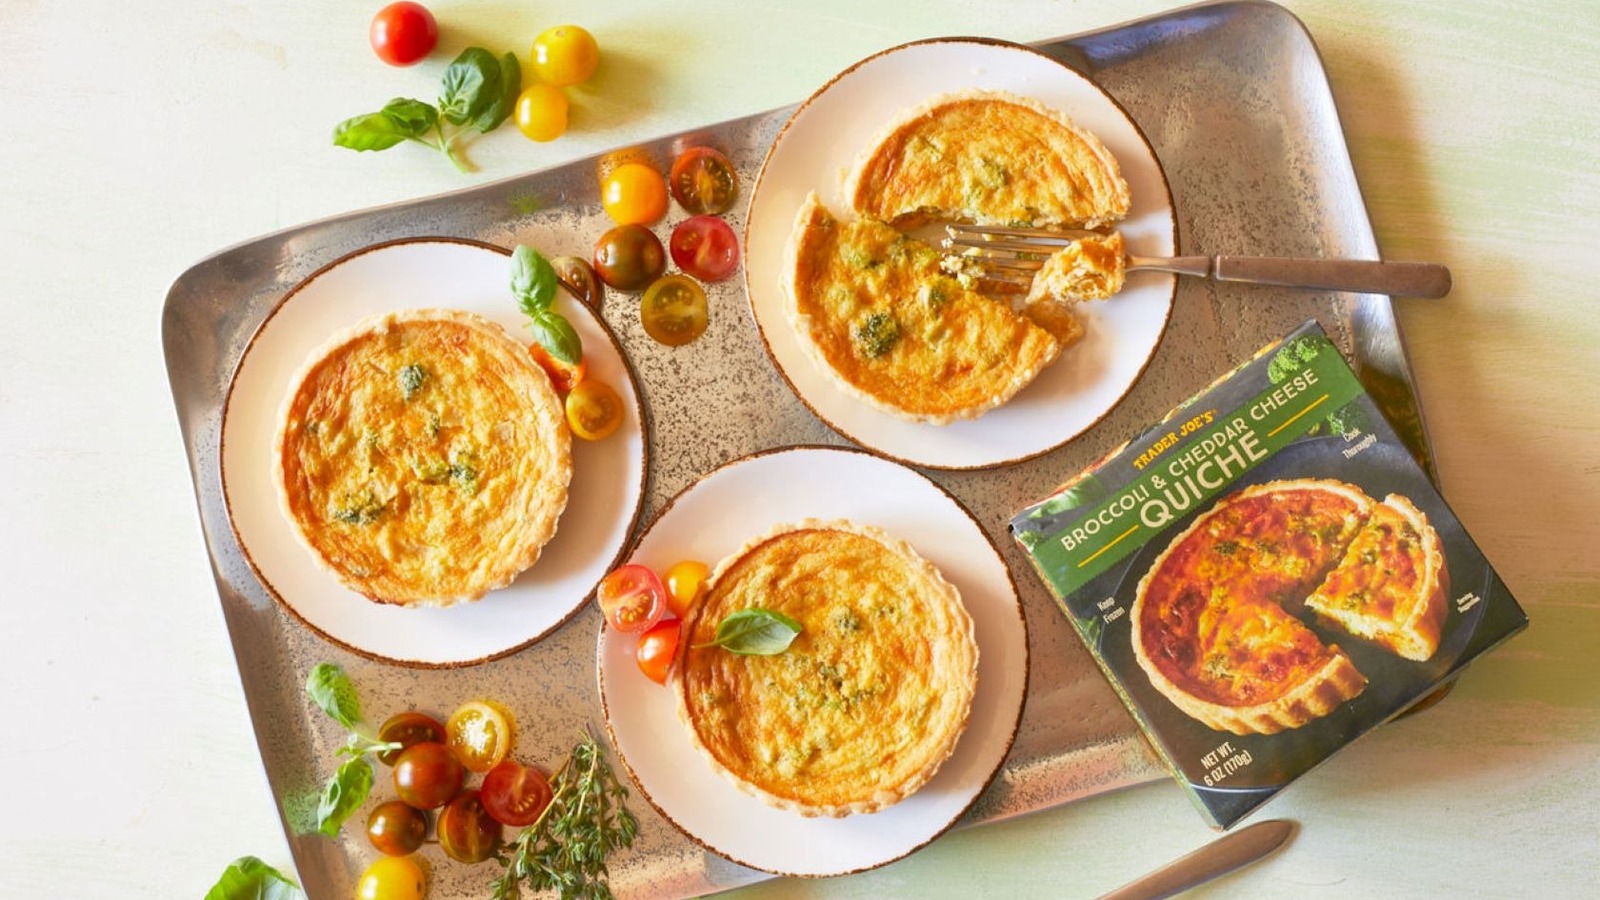 Trader Joe's Broccoli And Cheddar Quiches Are Back In Stores